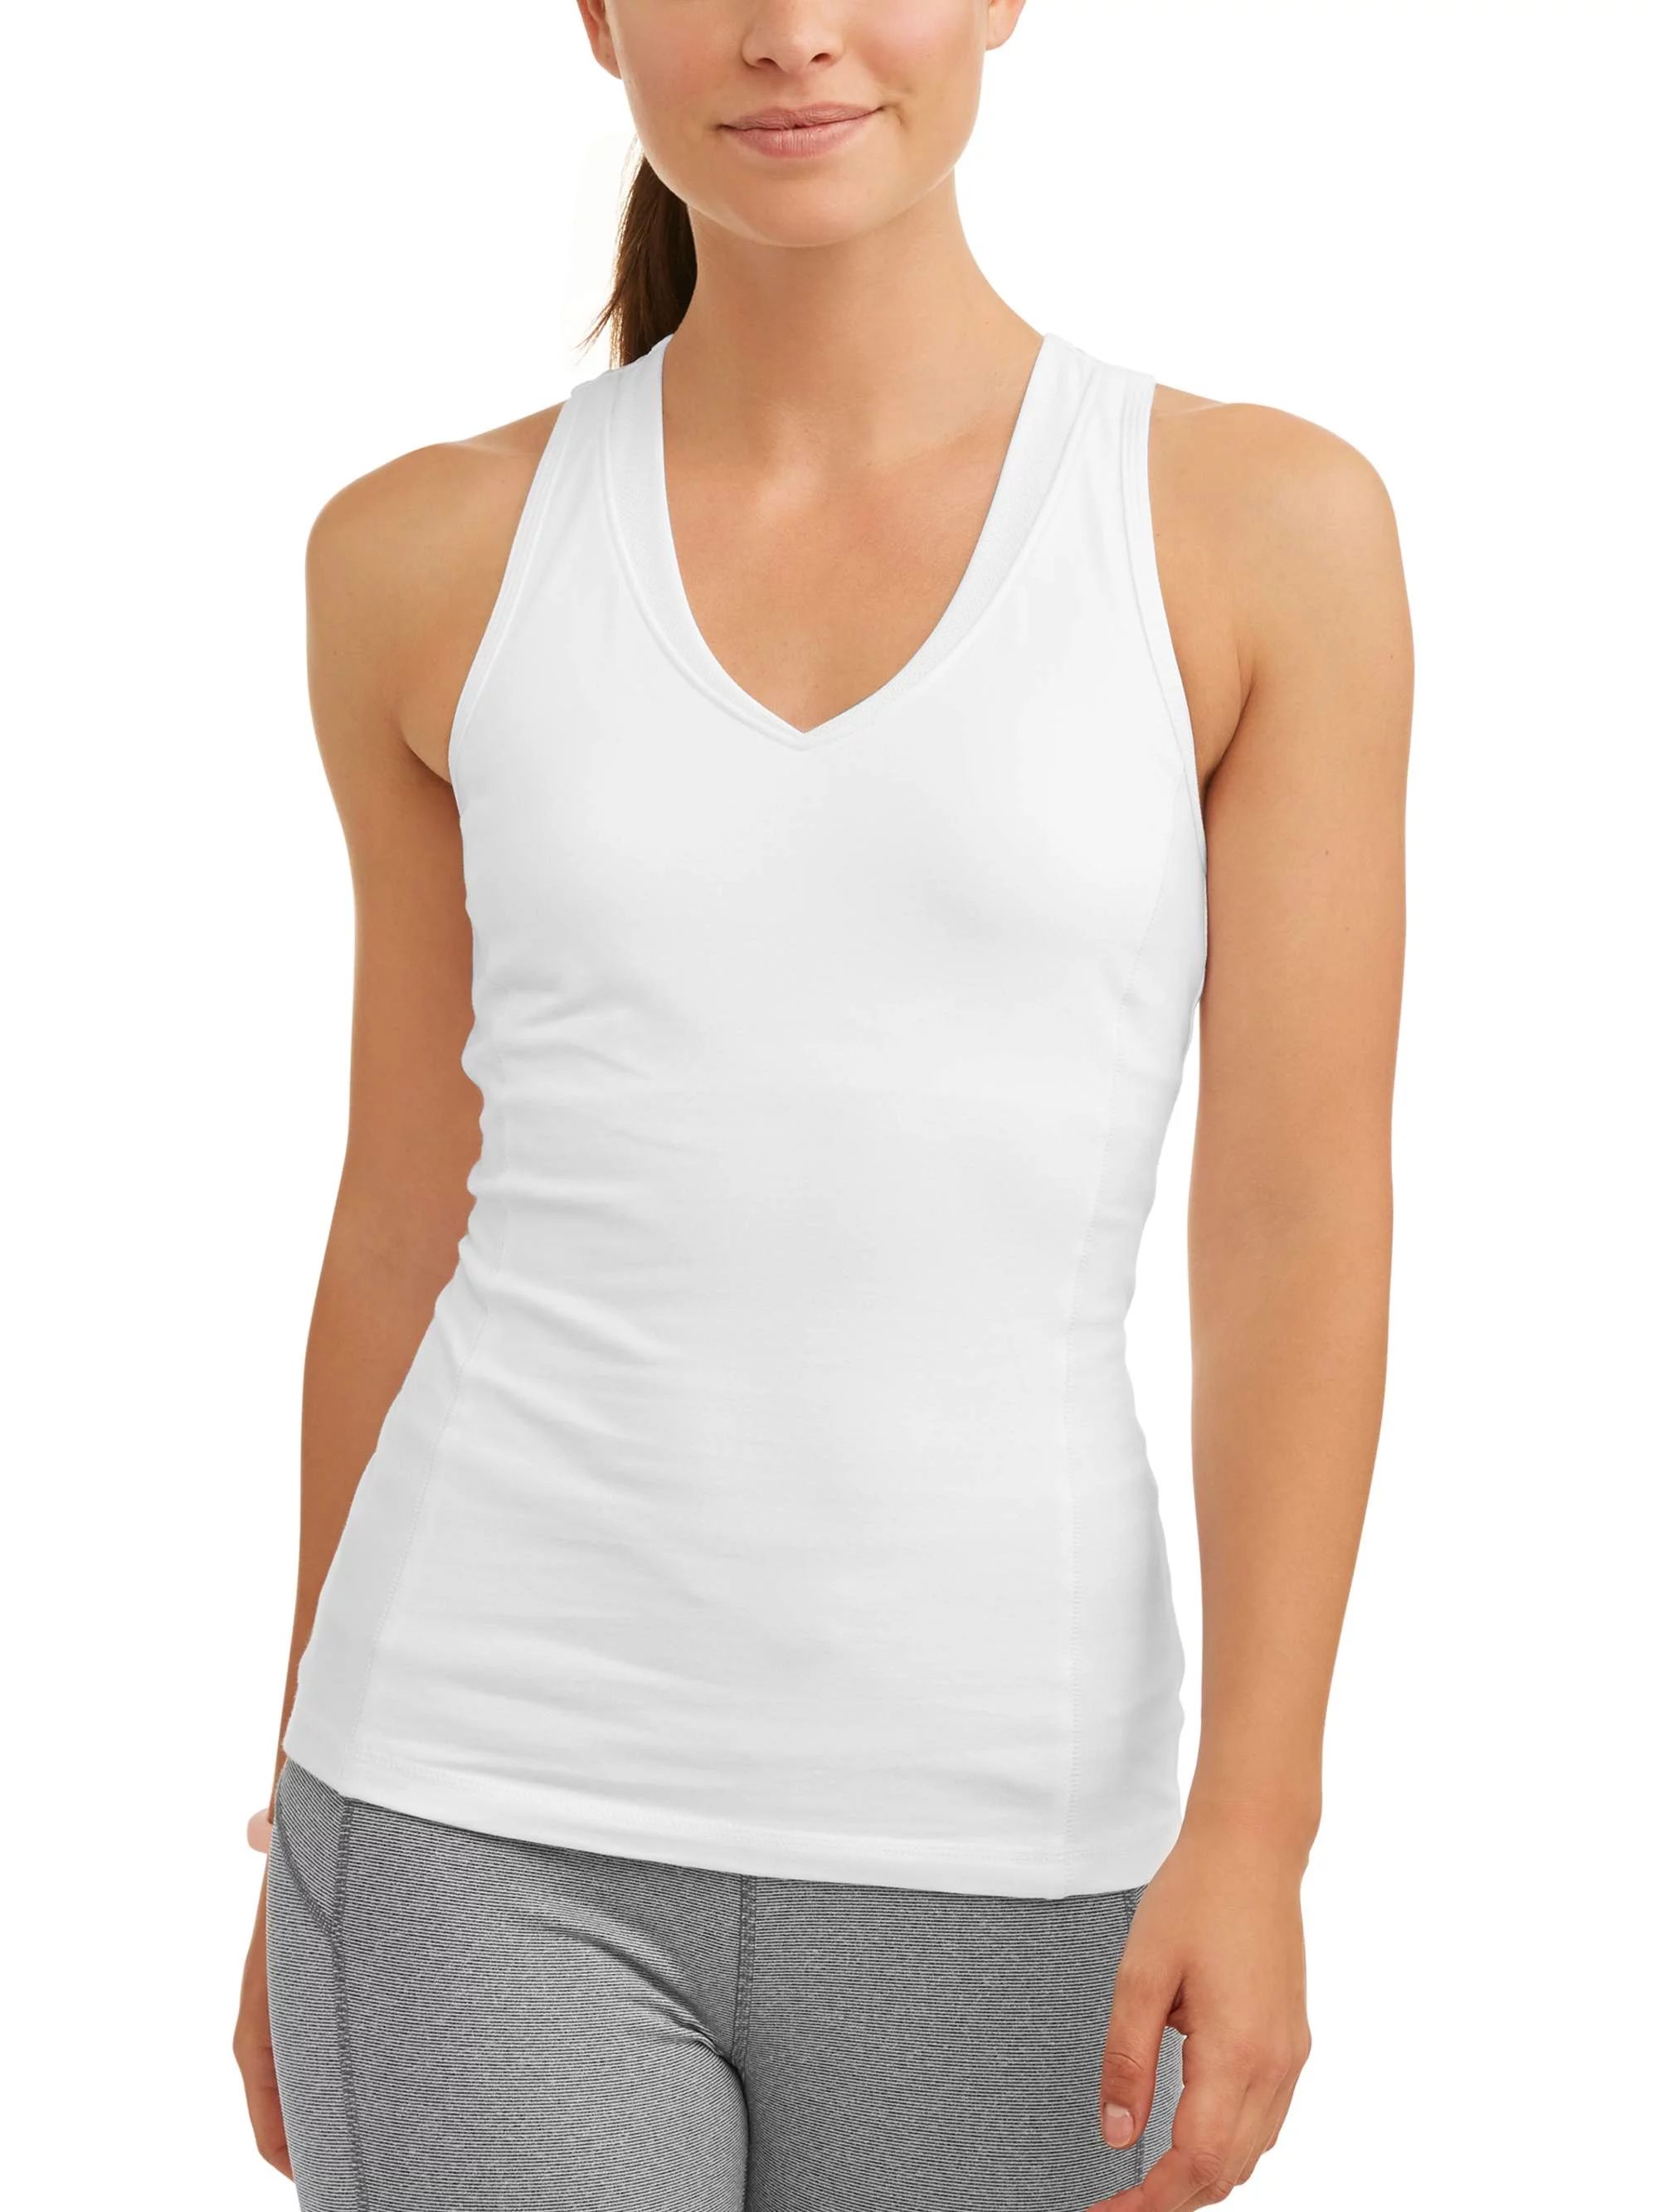 Athletic Works Women's V-Neck Racerback Tank Top with Back Mesh, Sizes S-XXL | Walmart (US)